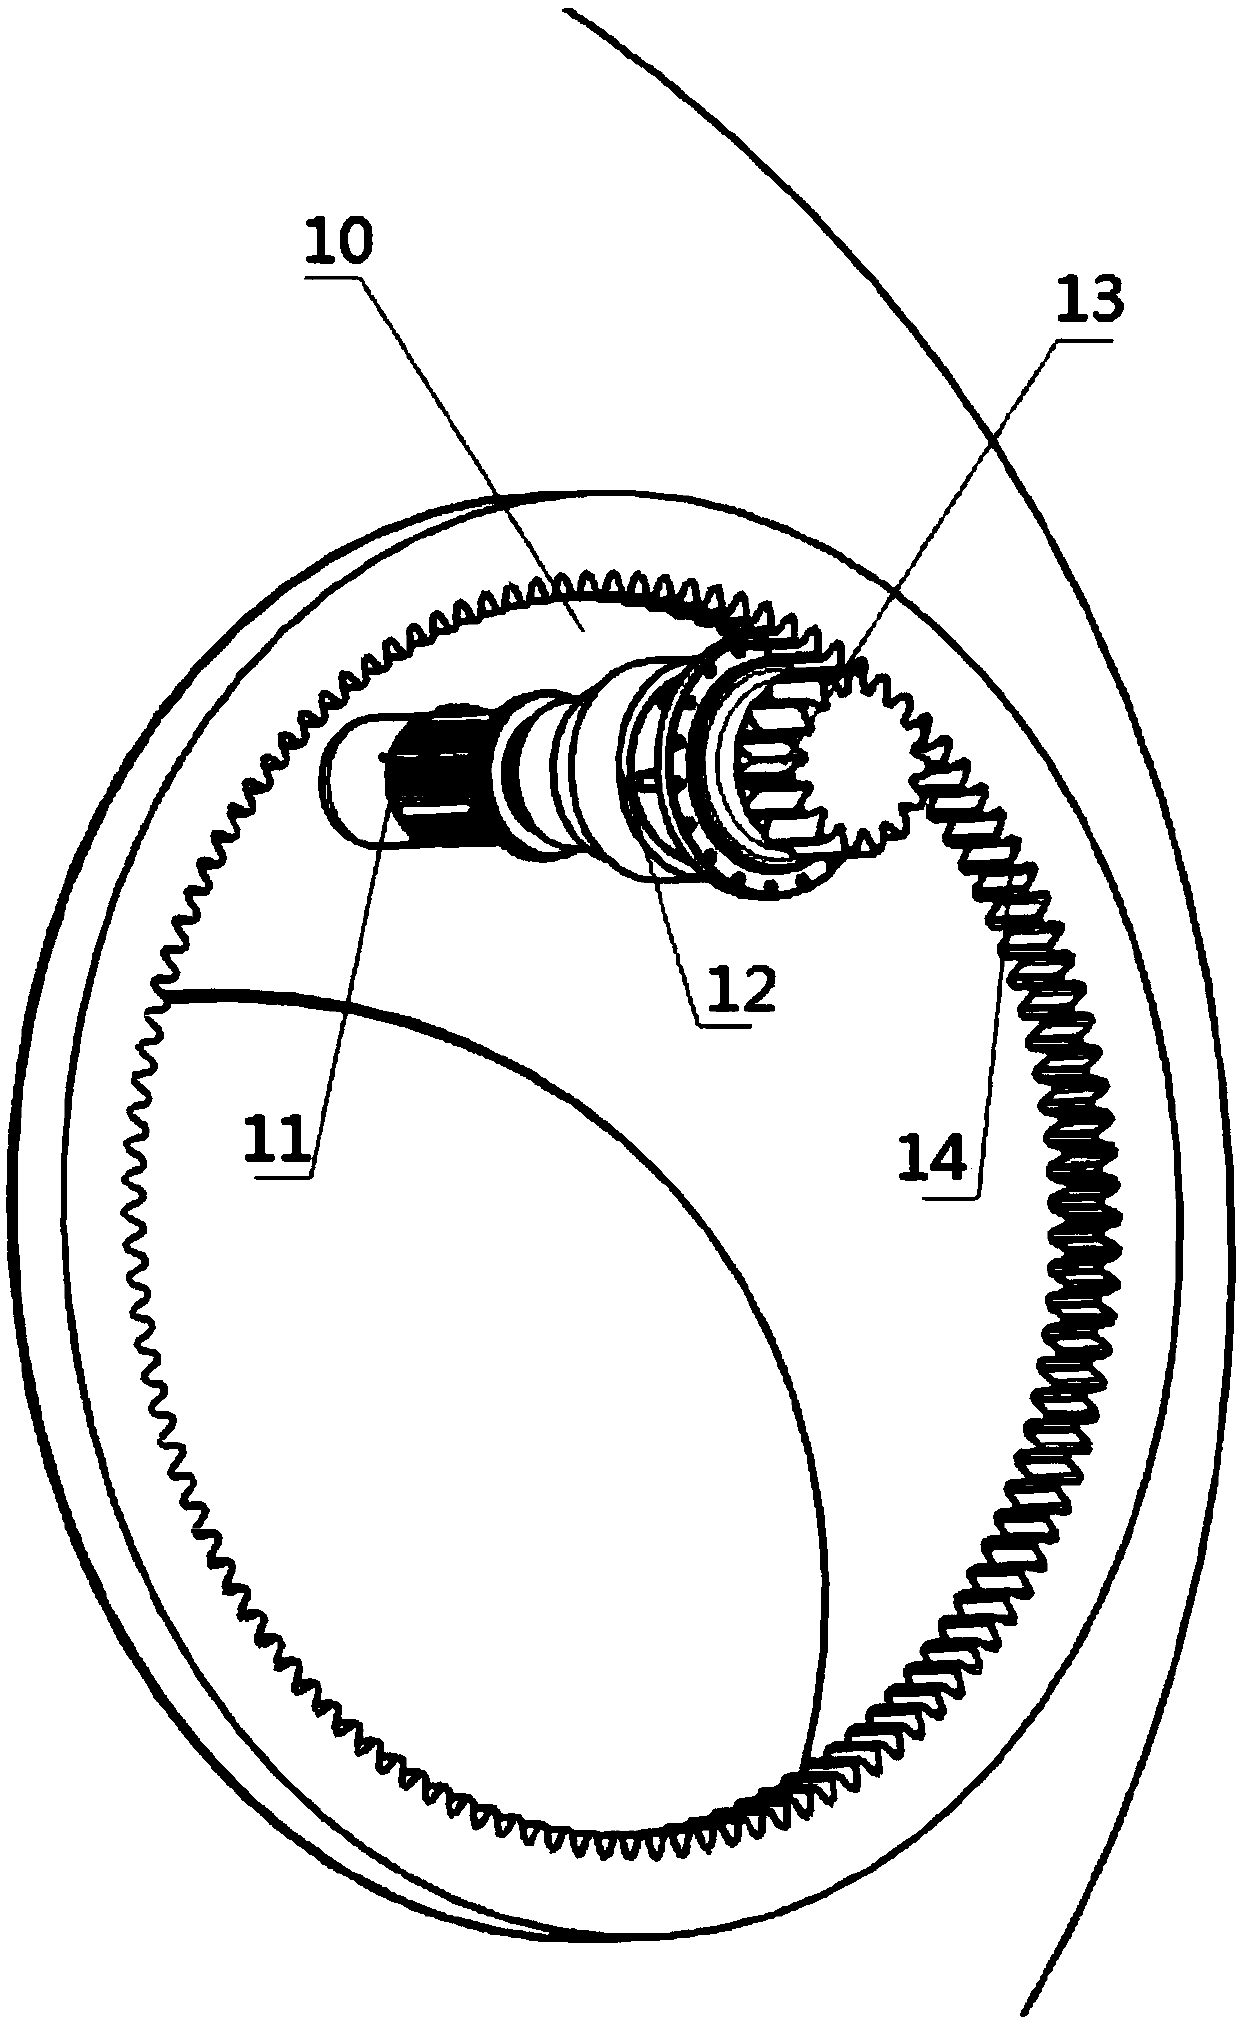 Yaw variable pitch mechanism